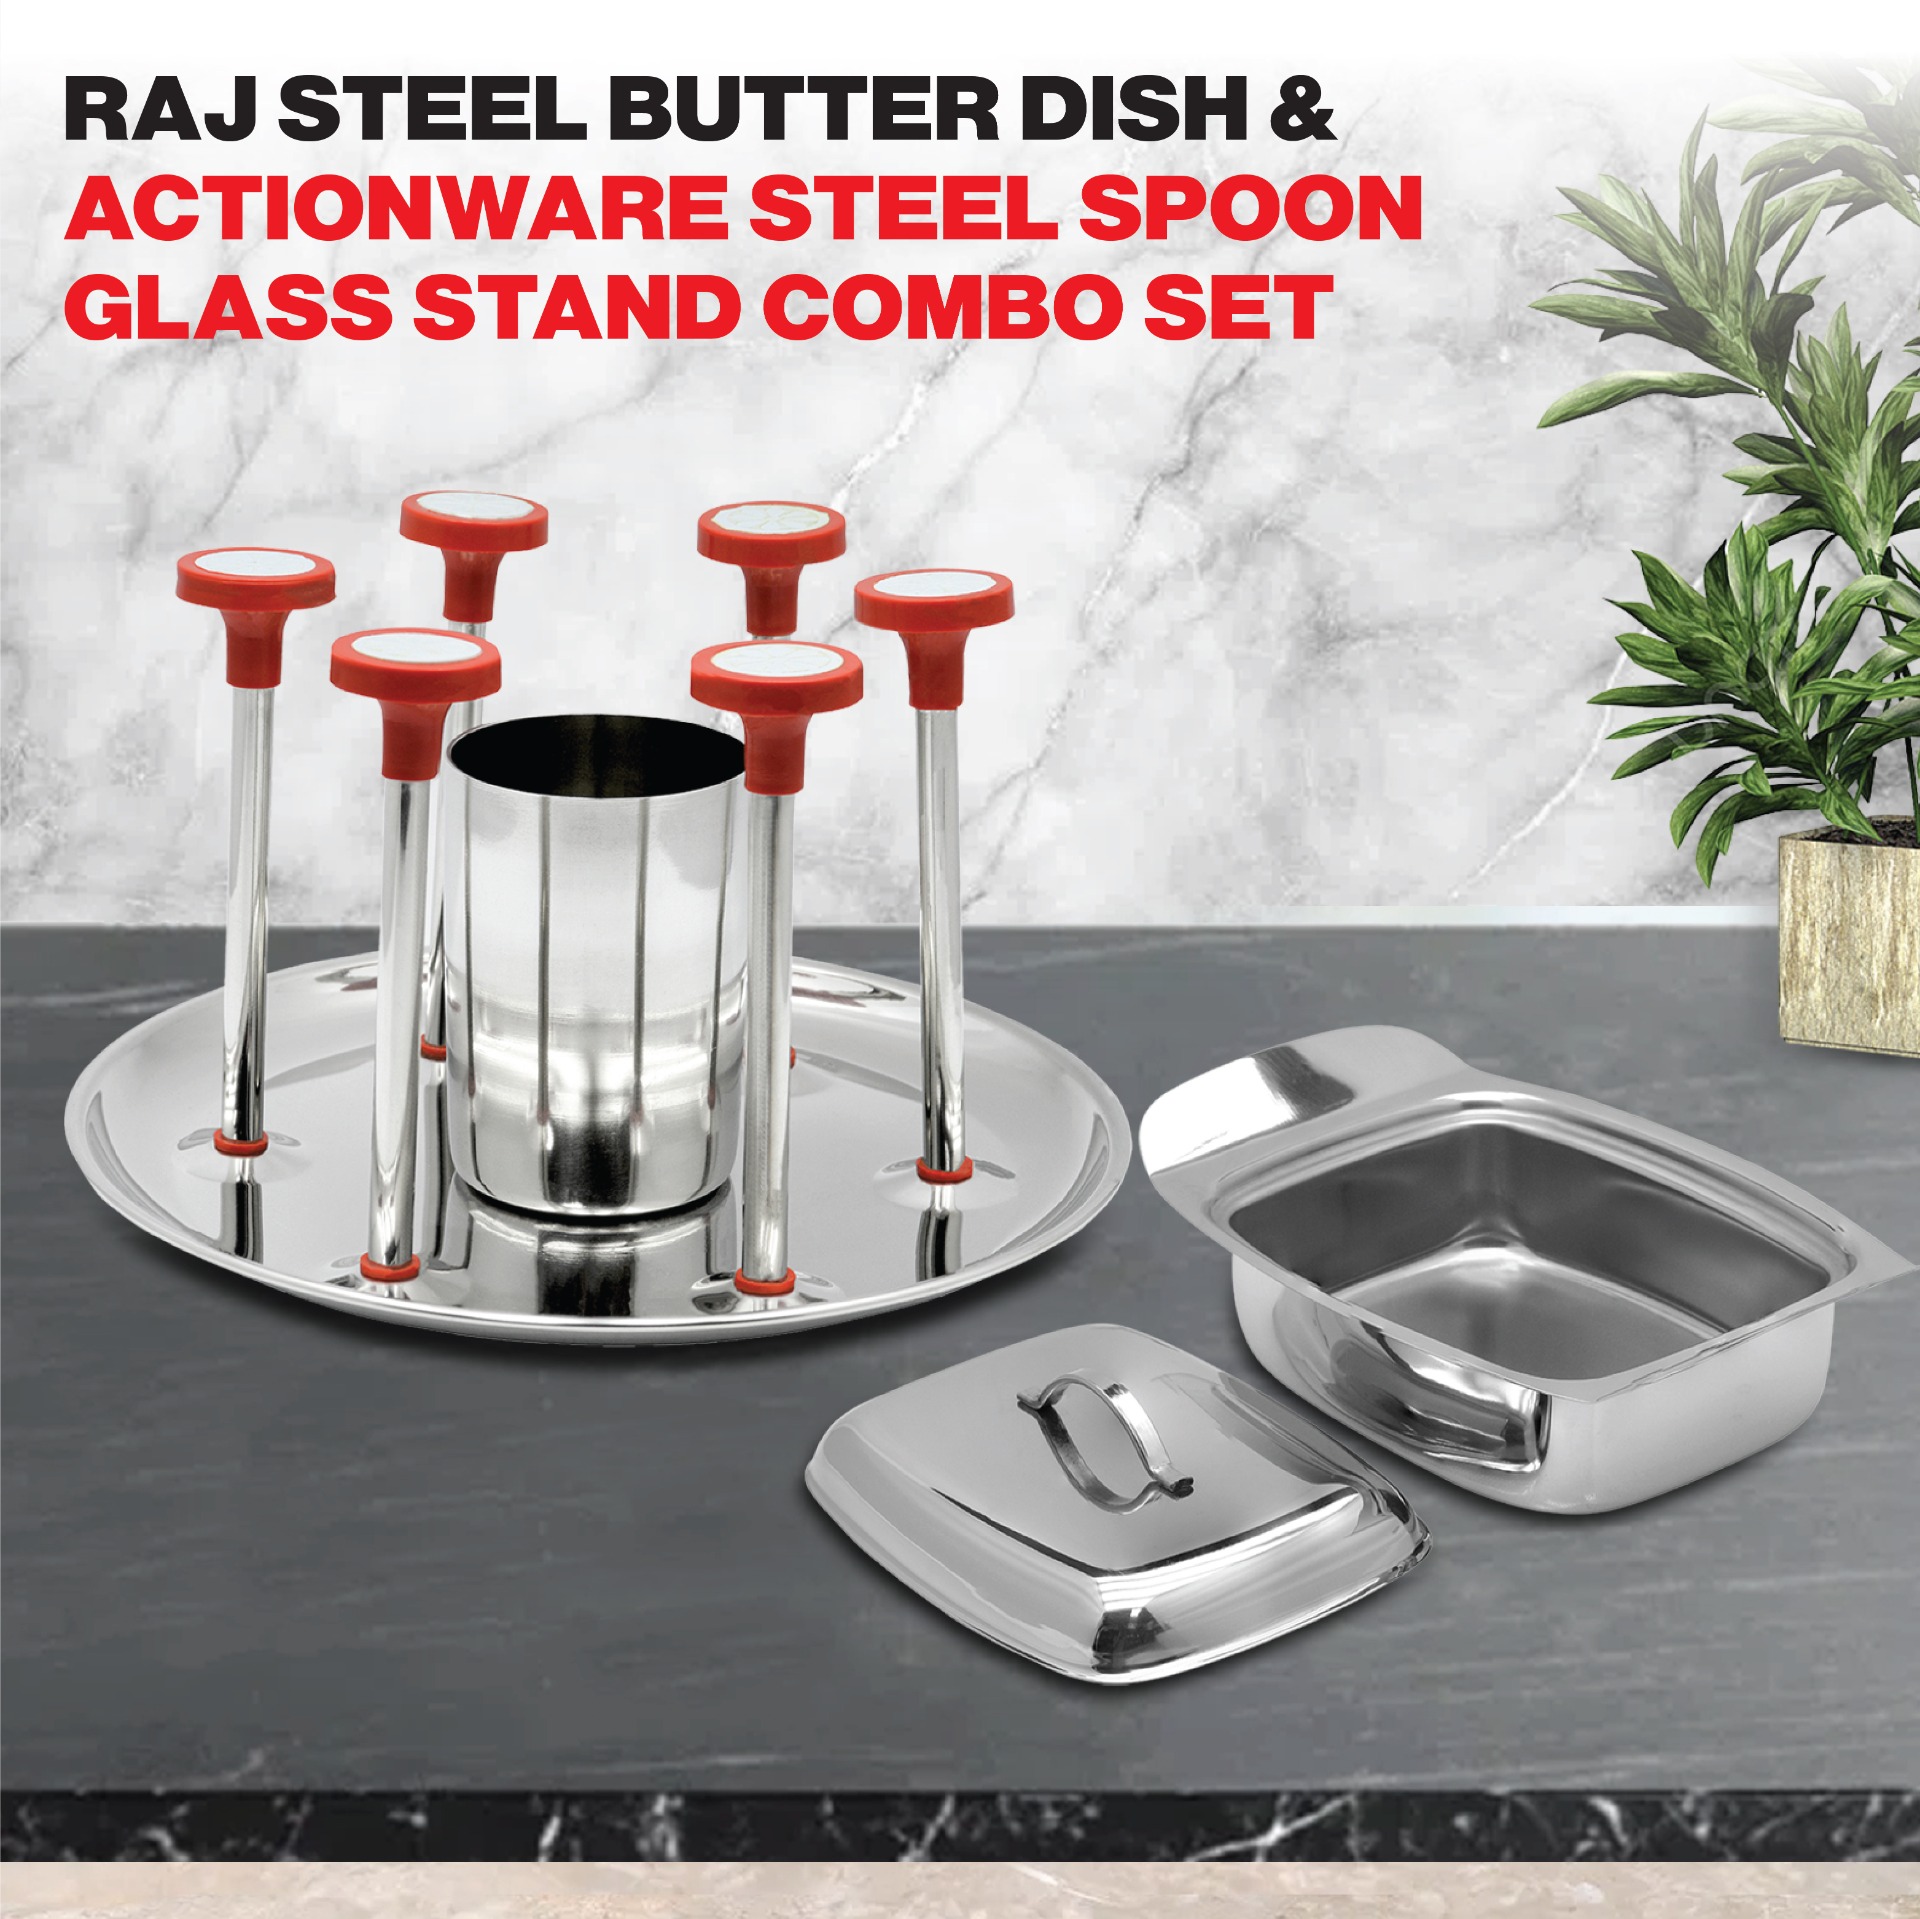 Raj Steel Butter Dish and Actionware Steel Spoon And Glass Stand Combo Set